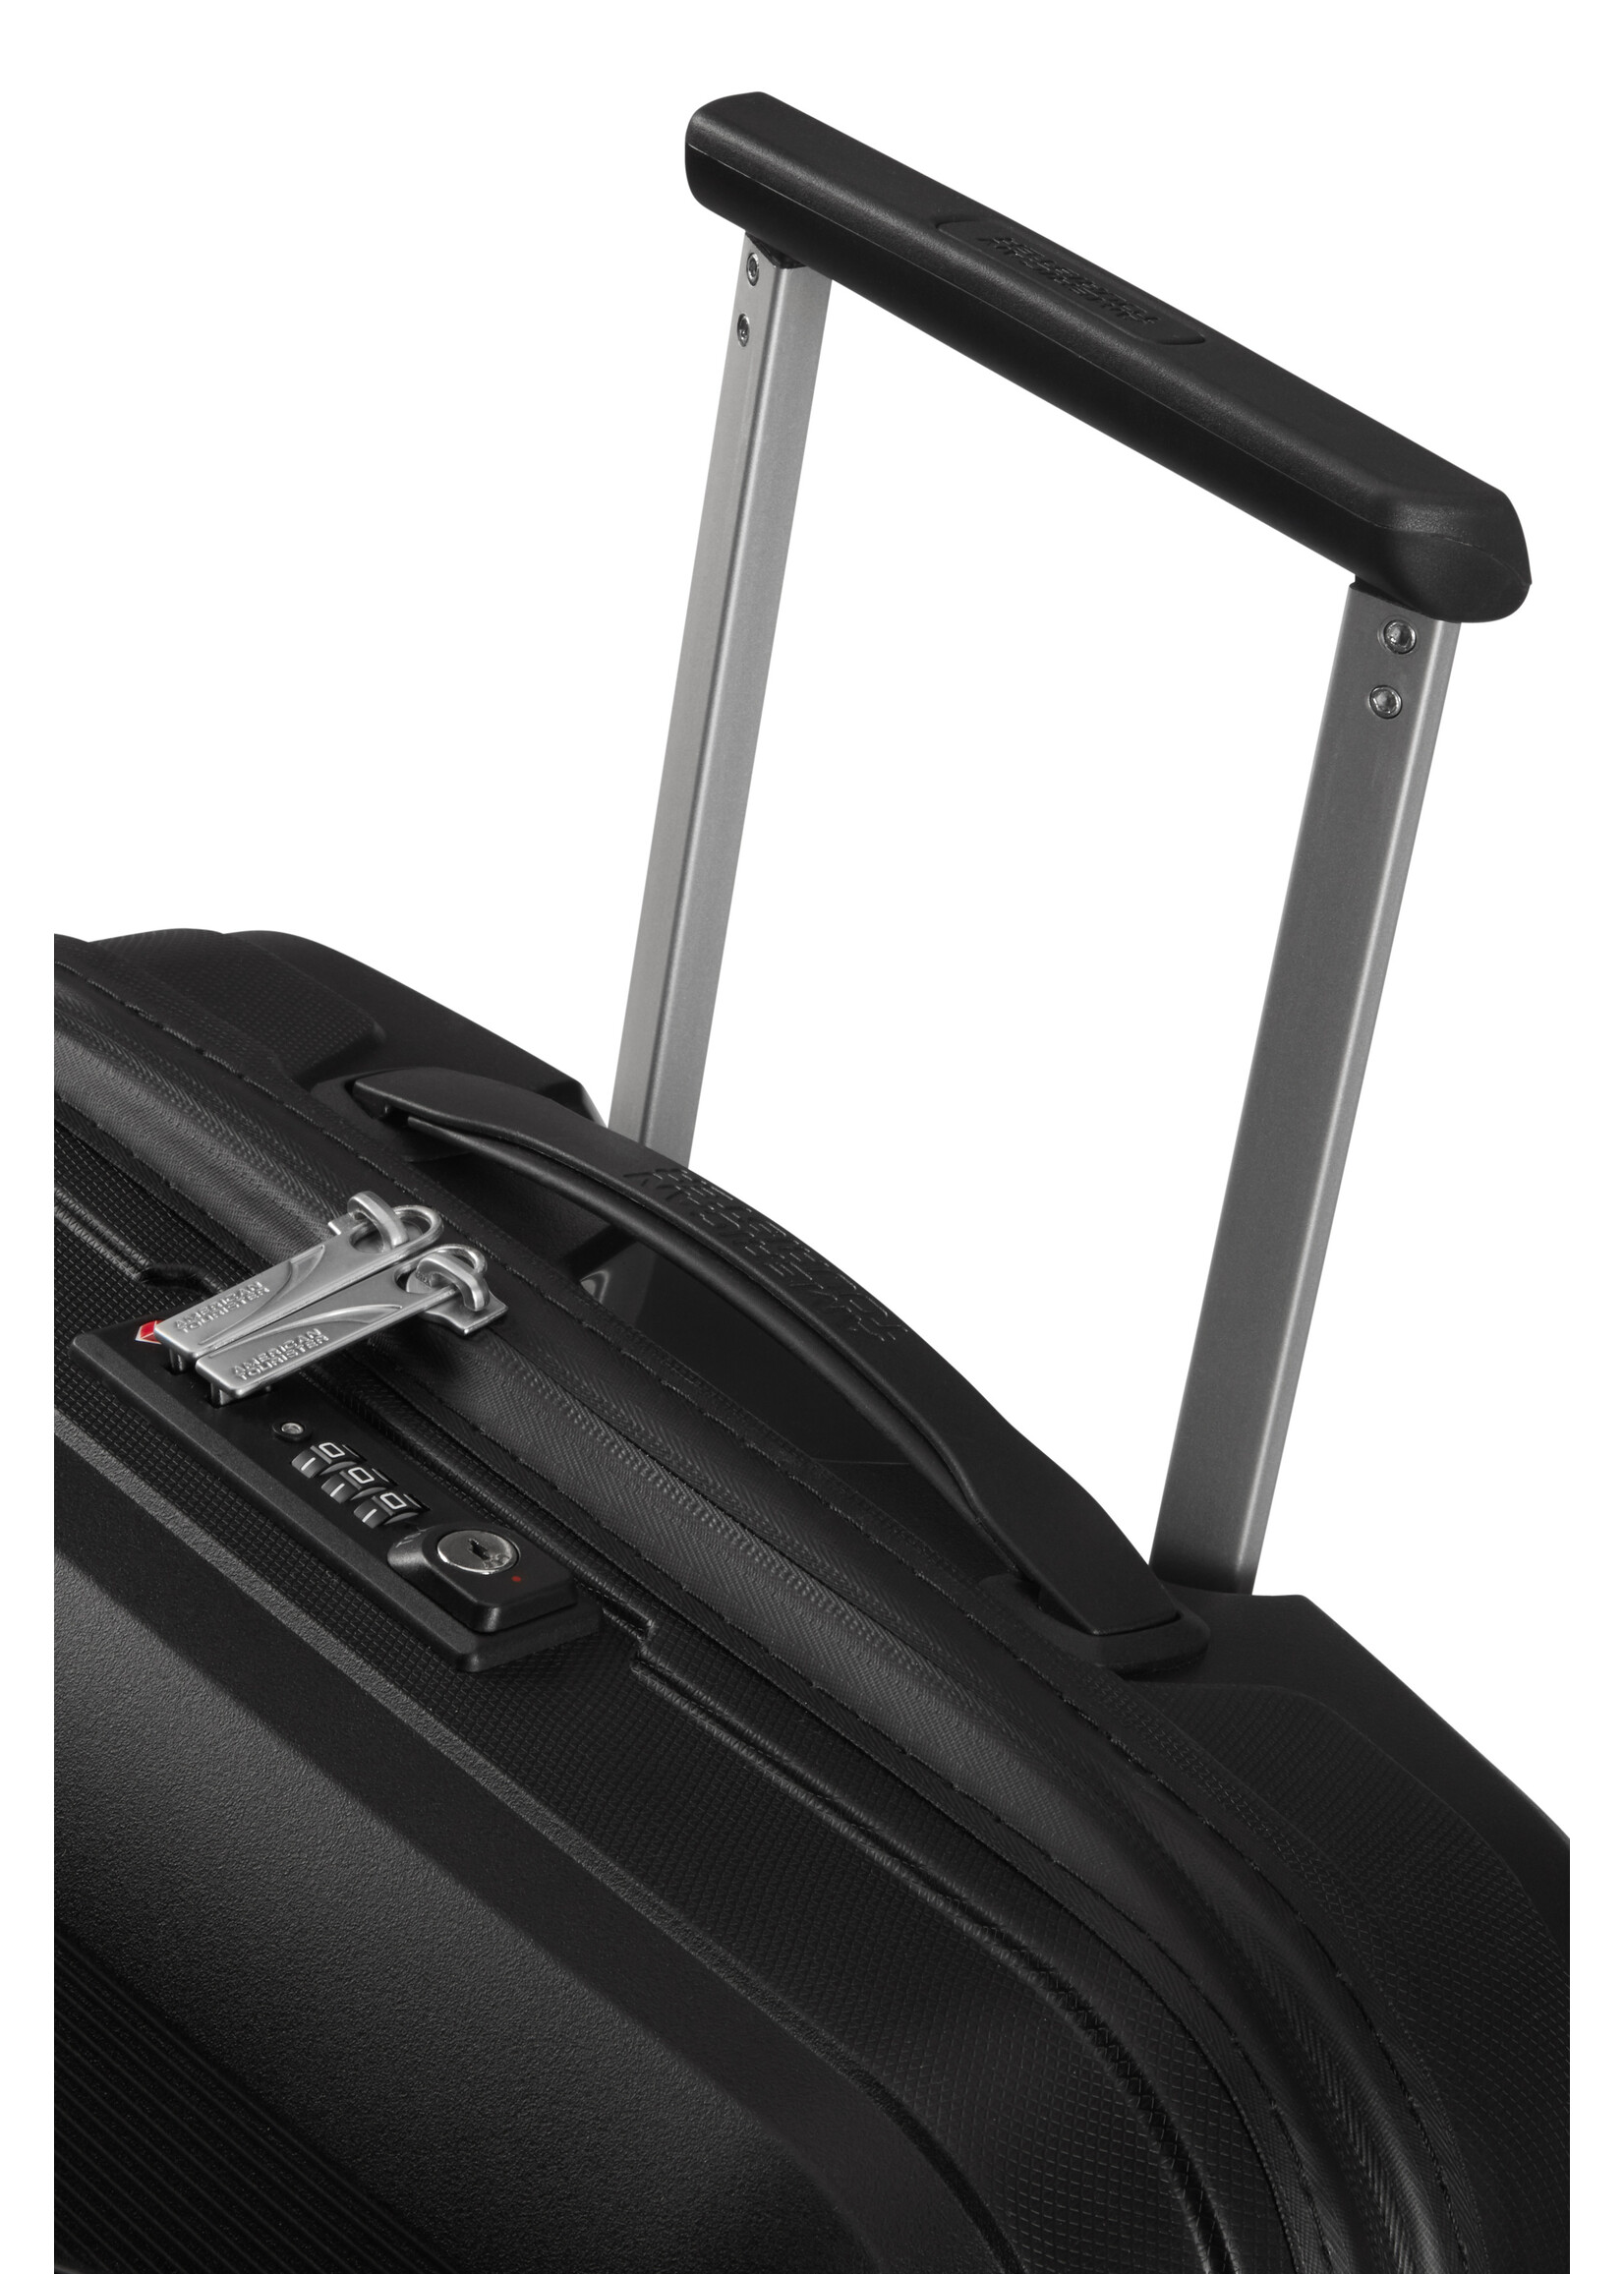 AMERICAN TOURISTER AIRCONIC SPINNER  55 ONYX BLACK